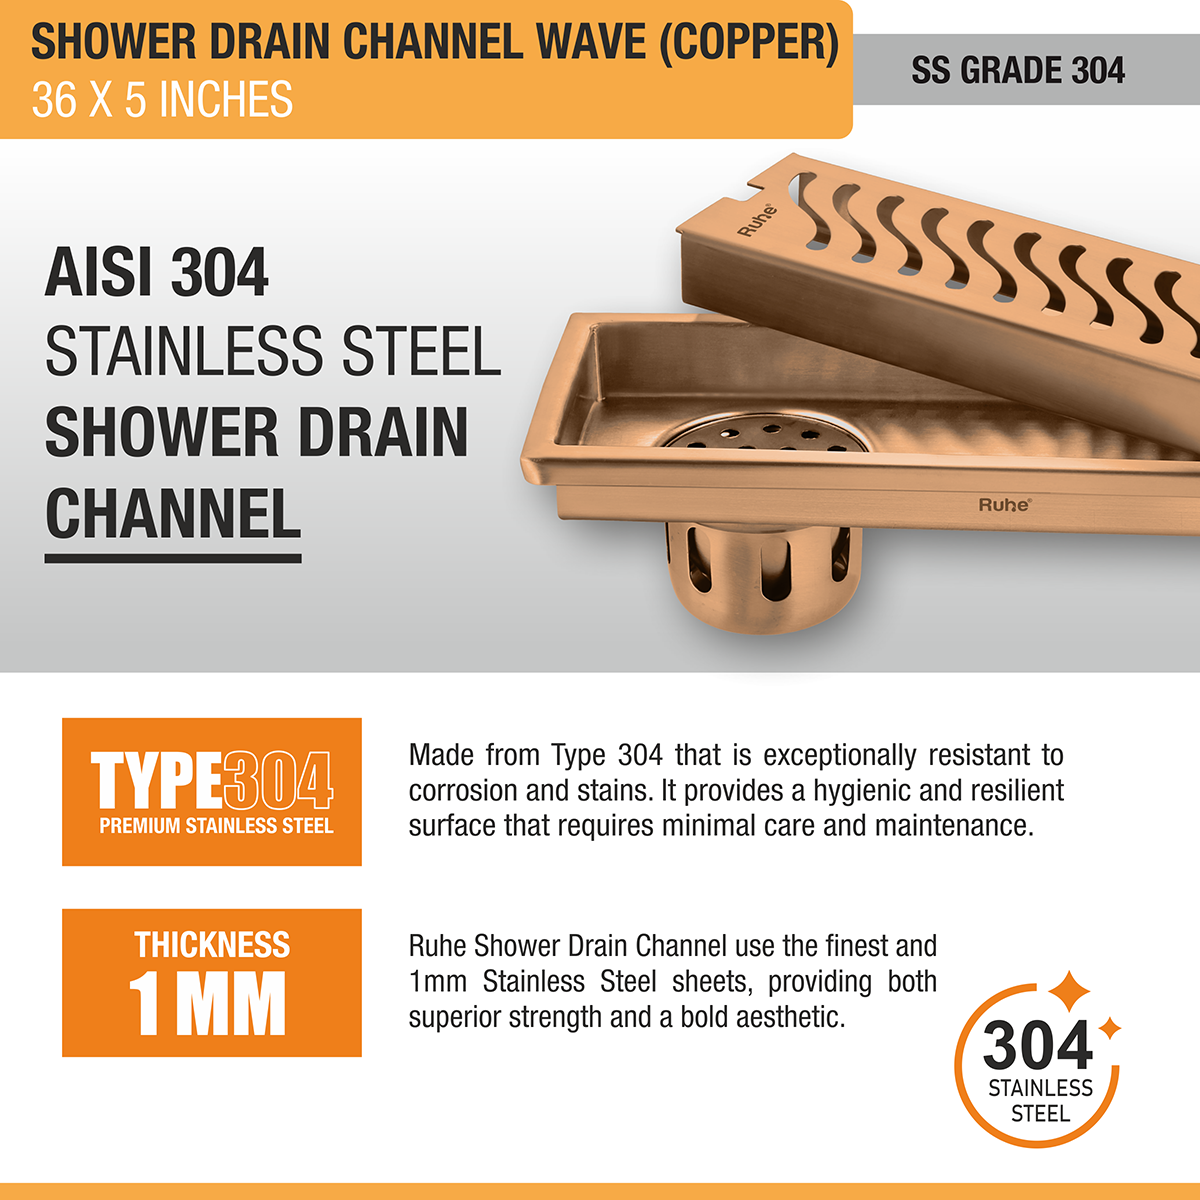 Wave Shower Drain Channel (36 x 5 Inches) ROSE GOLD/ANTIQUE COPPER stainless steel